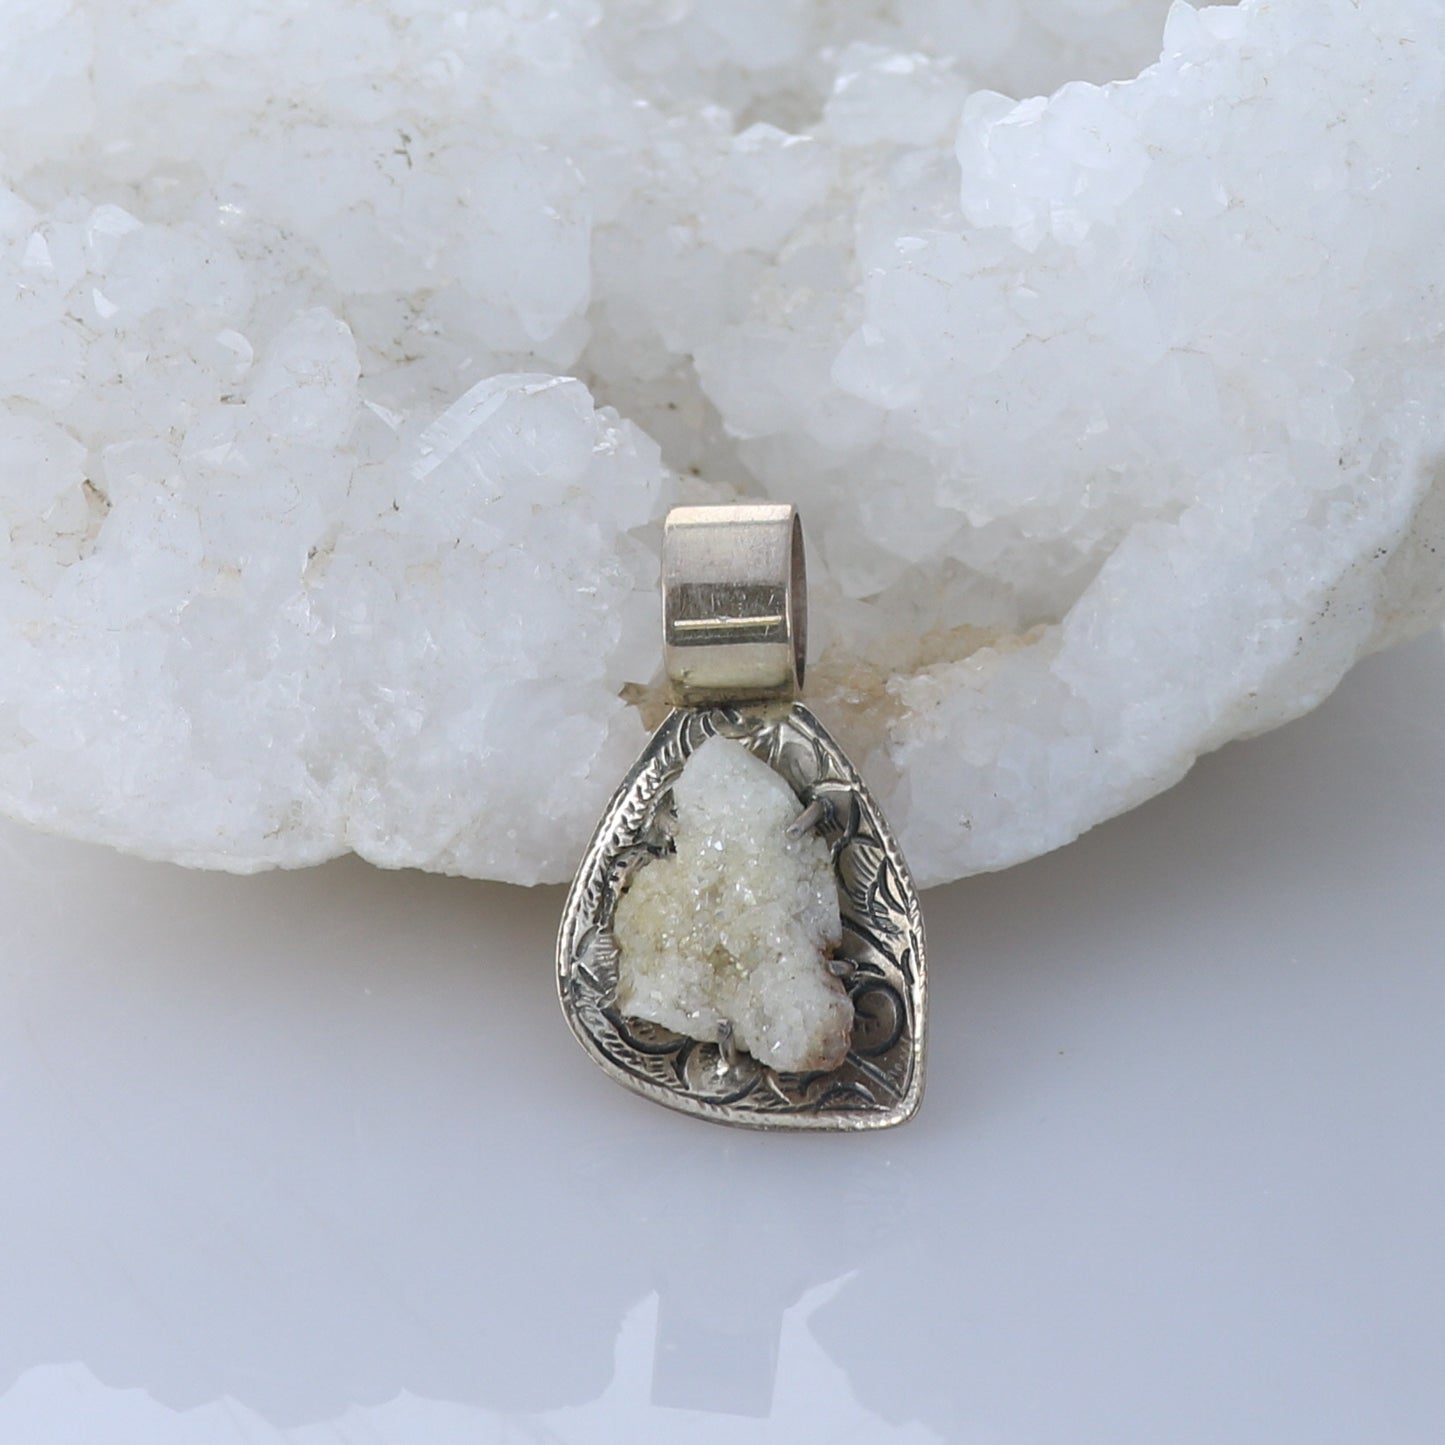 Drusy Crystal Pendant Sterling Silver Etched #2